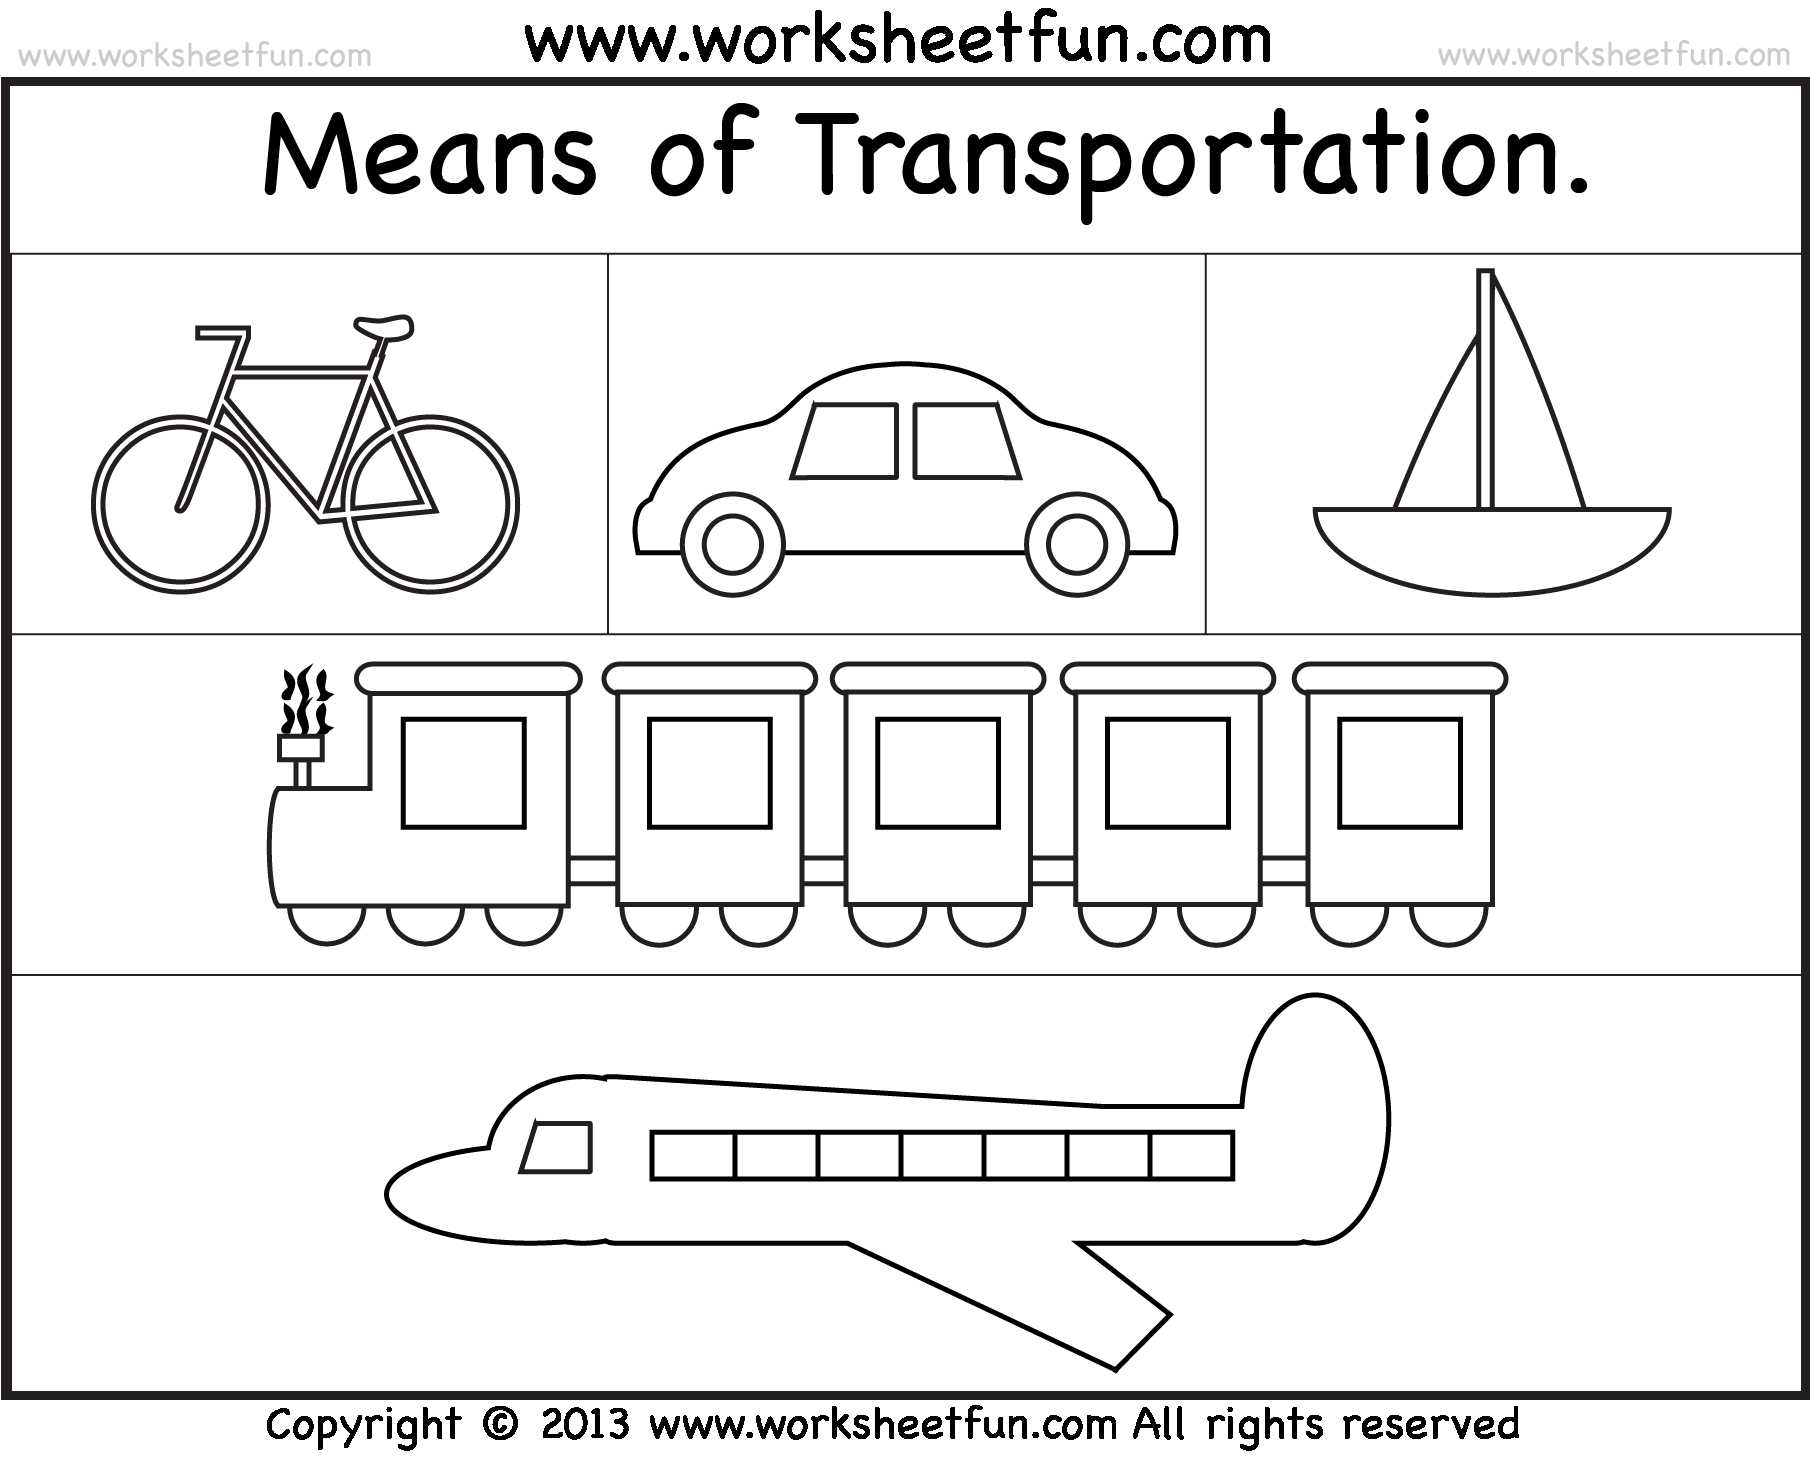 Transport In Cells Worksheet Answers as Well as Free Preschool Worksheets On Transportation Myscres